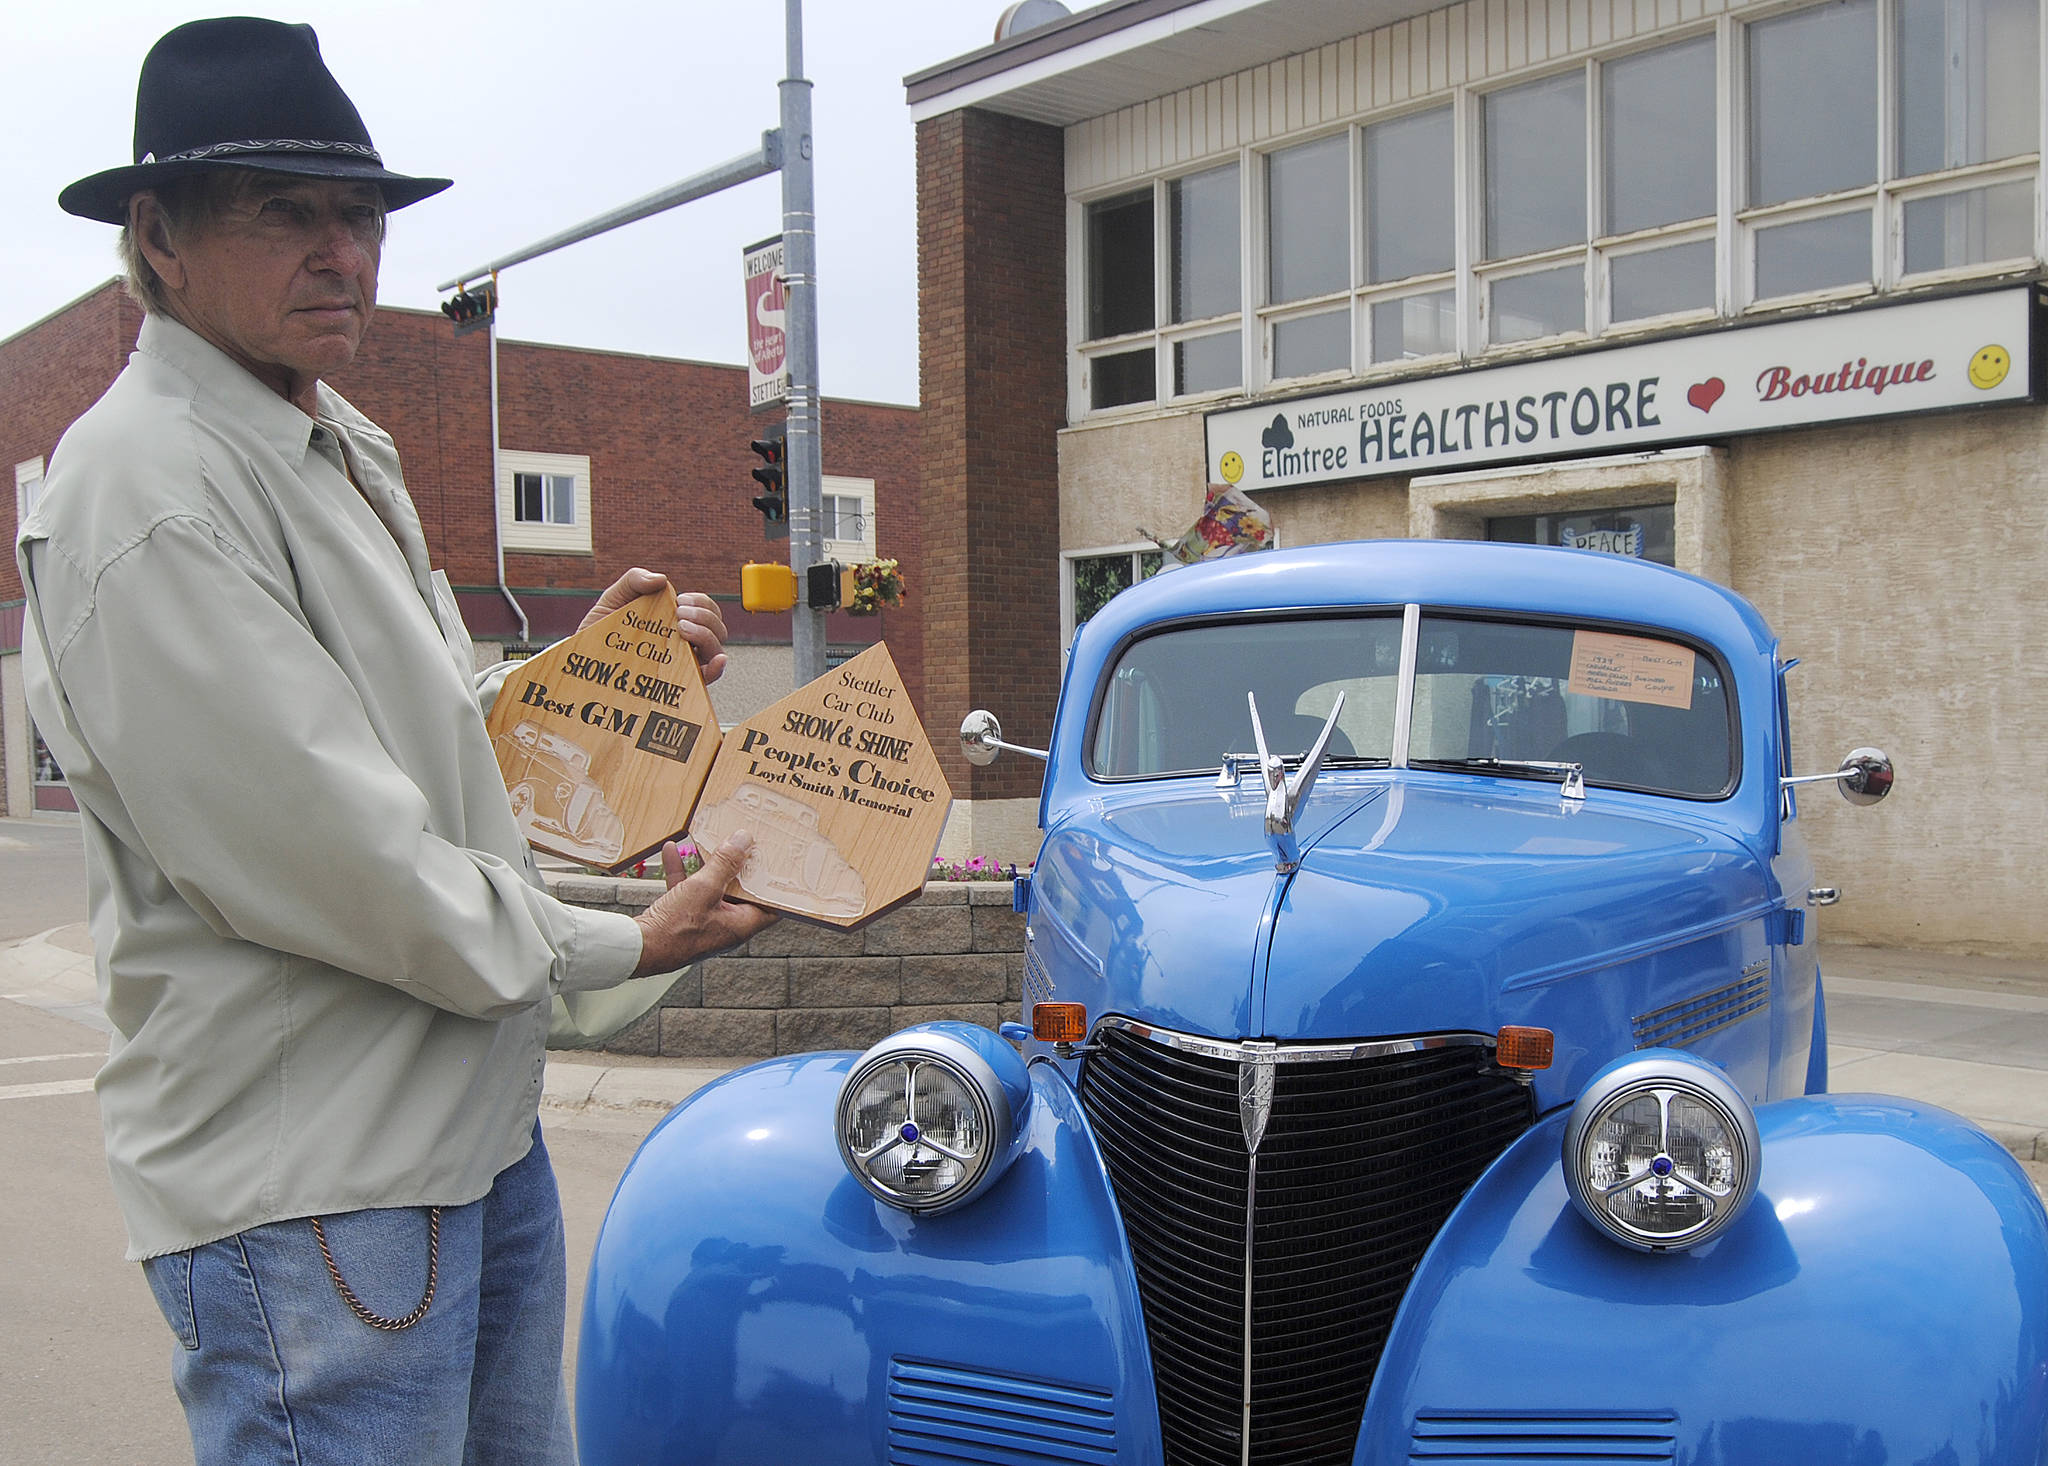 Mel Andres of Donalda took two awards (Best GM and Peoples’ Choice/Loyd Smith Memorial) during Stettler’s Show ‘N’ Shine for his rare 1939 Chev Master Delux. (Lisa Joy/Stettler Independent)